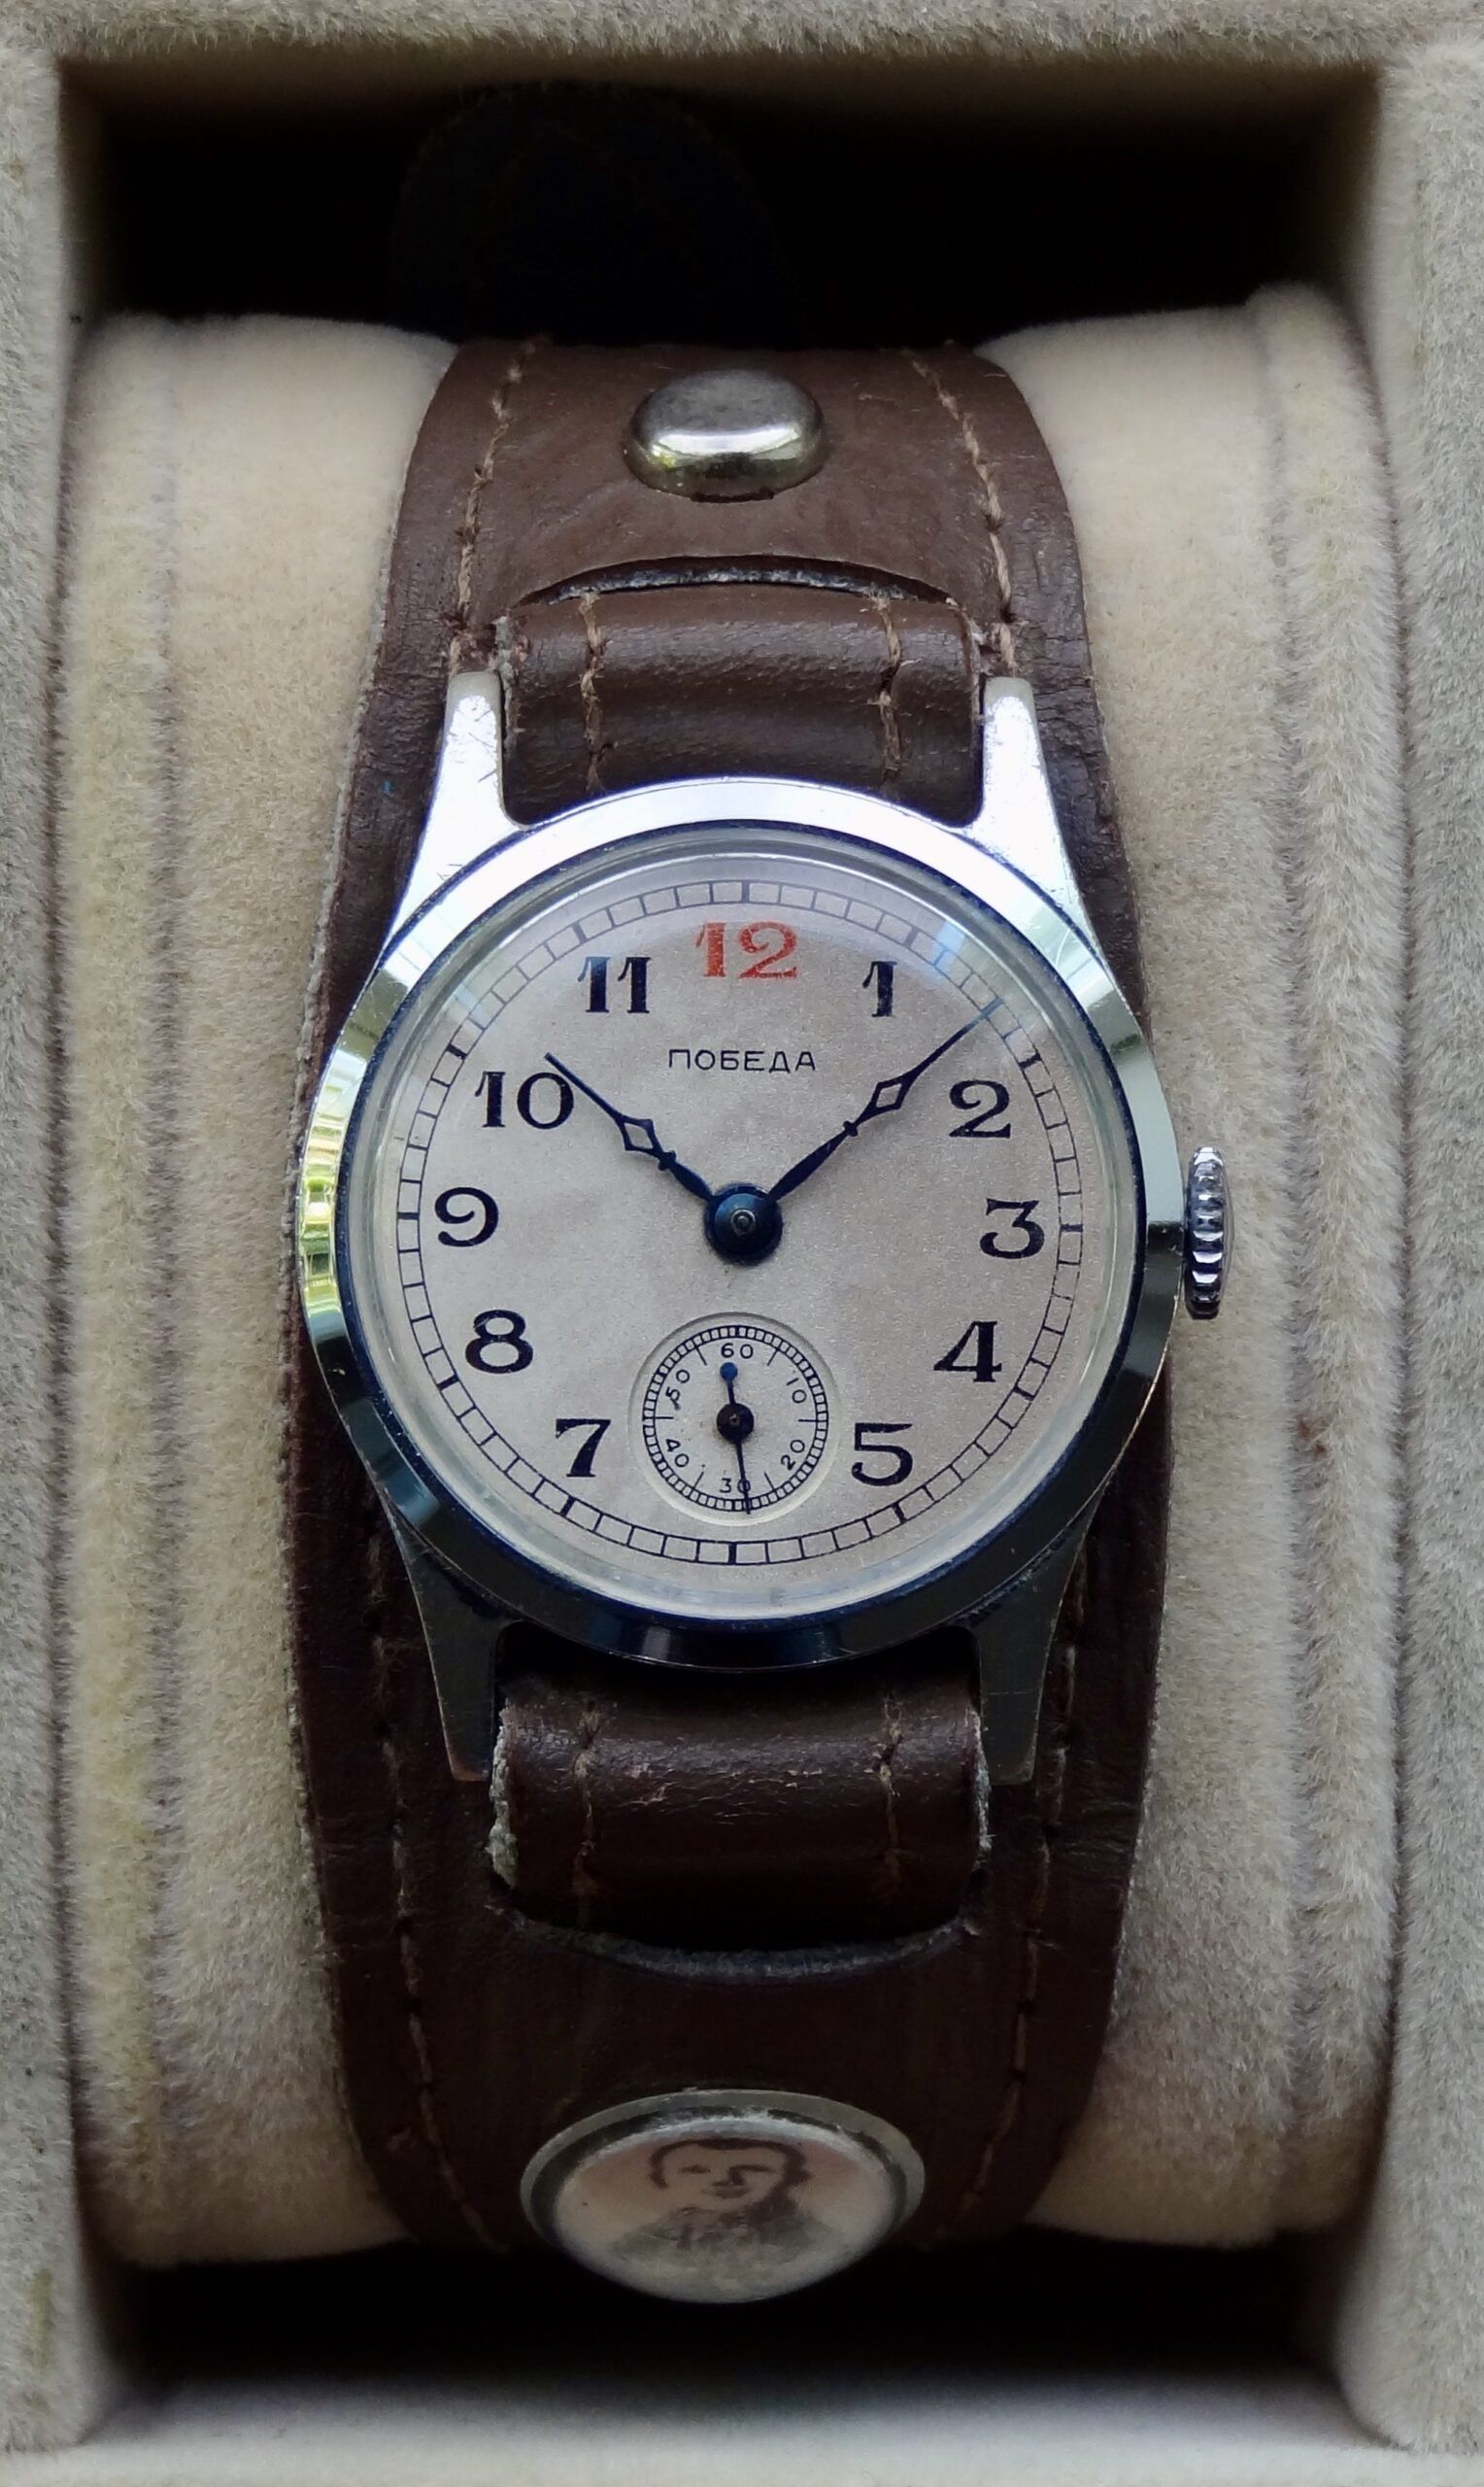 Pobeda wrist watch made in 1MCHZ factory. (Courtesy: Dashiell Stanford; https://mroatman.wixsite.com/watches-of-the-ussr)